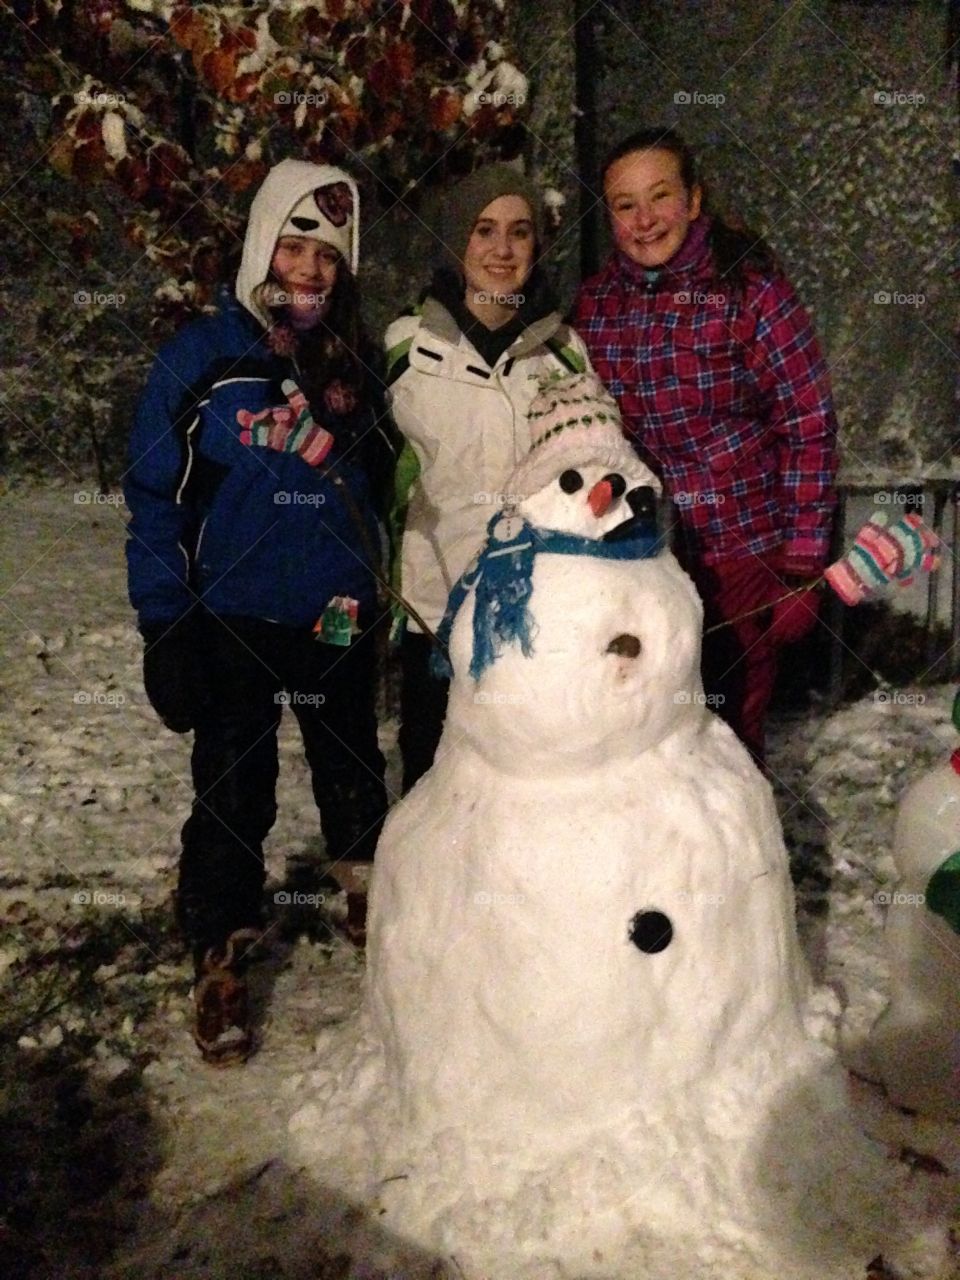 Snowman!  . Three friends building a snowman at night after the first snowfall.
